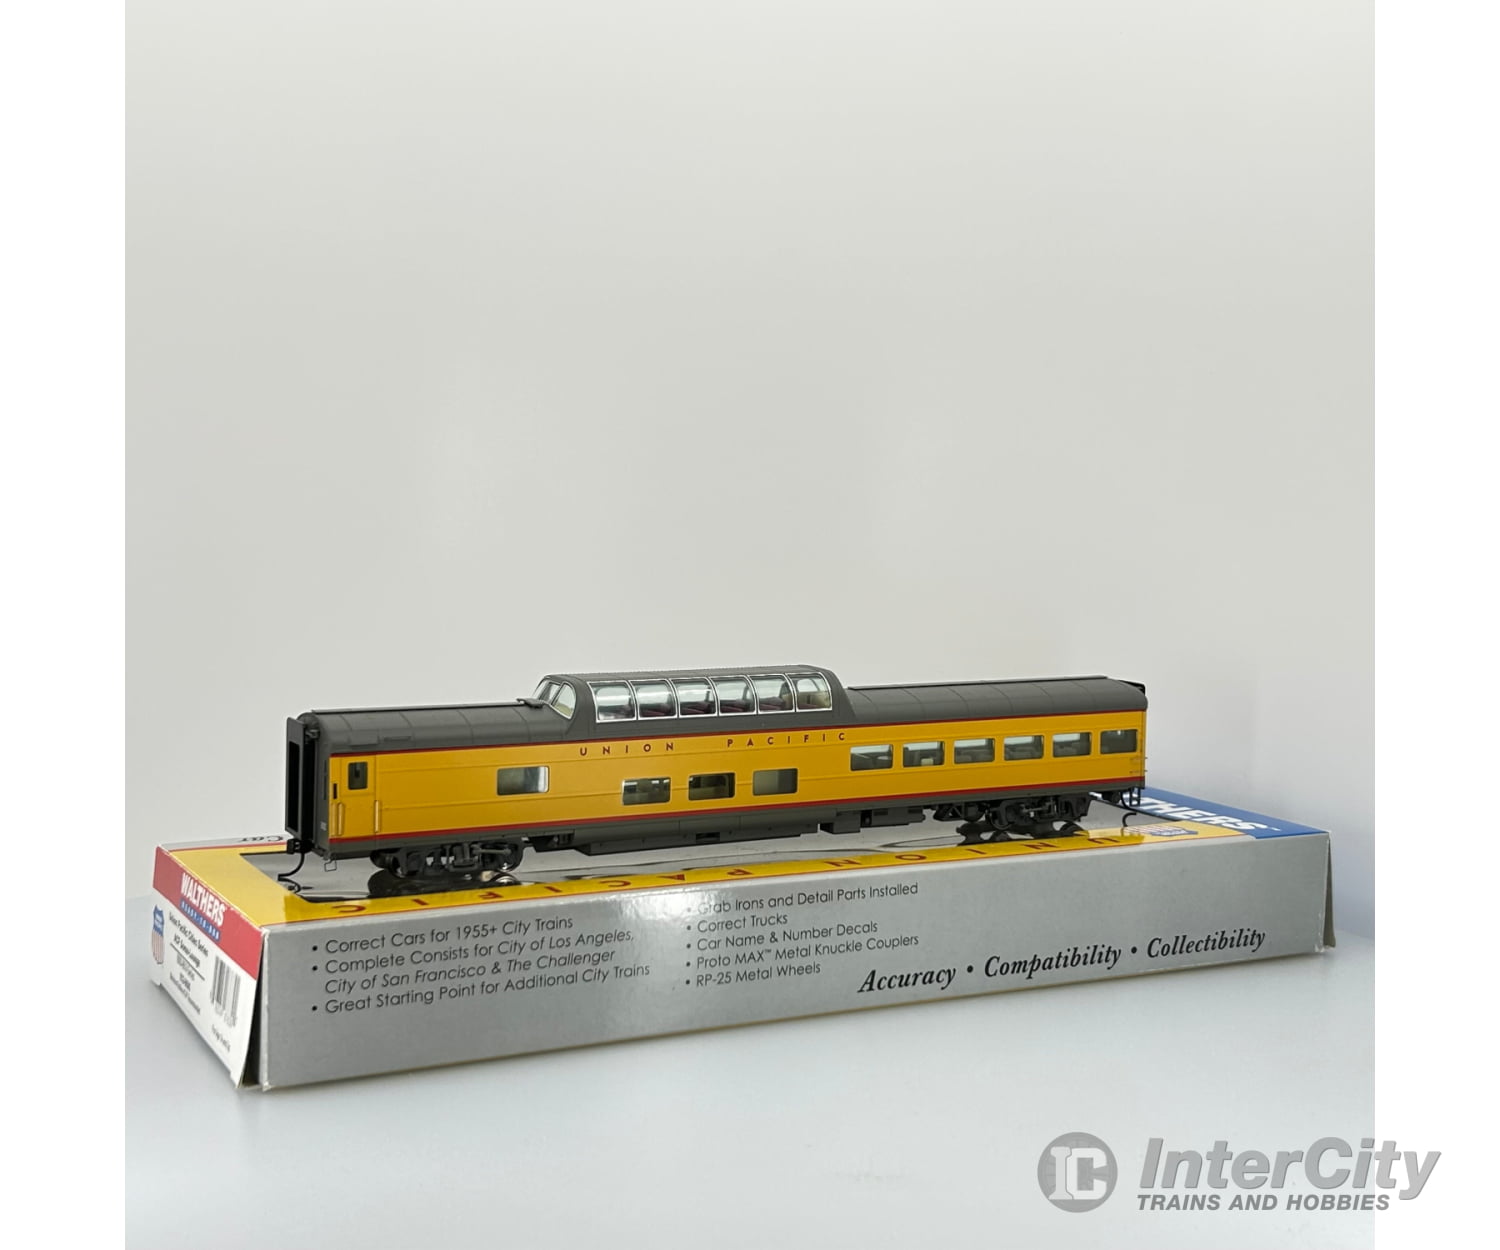 Walthers 932-9600 Ho Acf Dome-Lounge Cities Series 9000-9014 Union Pacific Passenger Cars